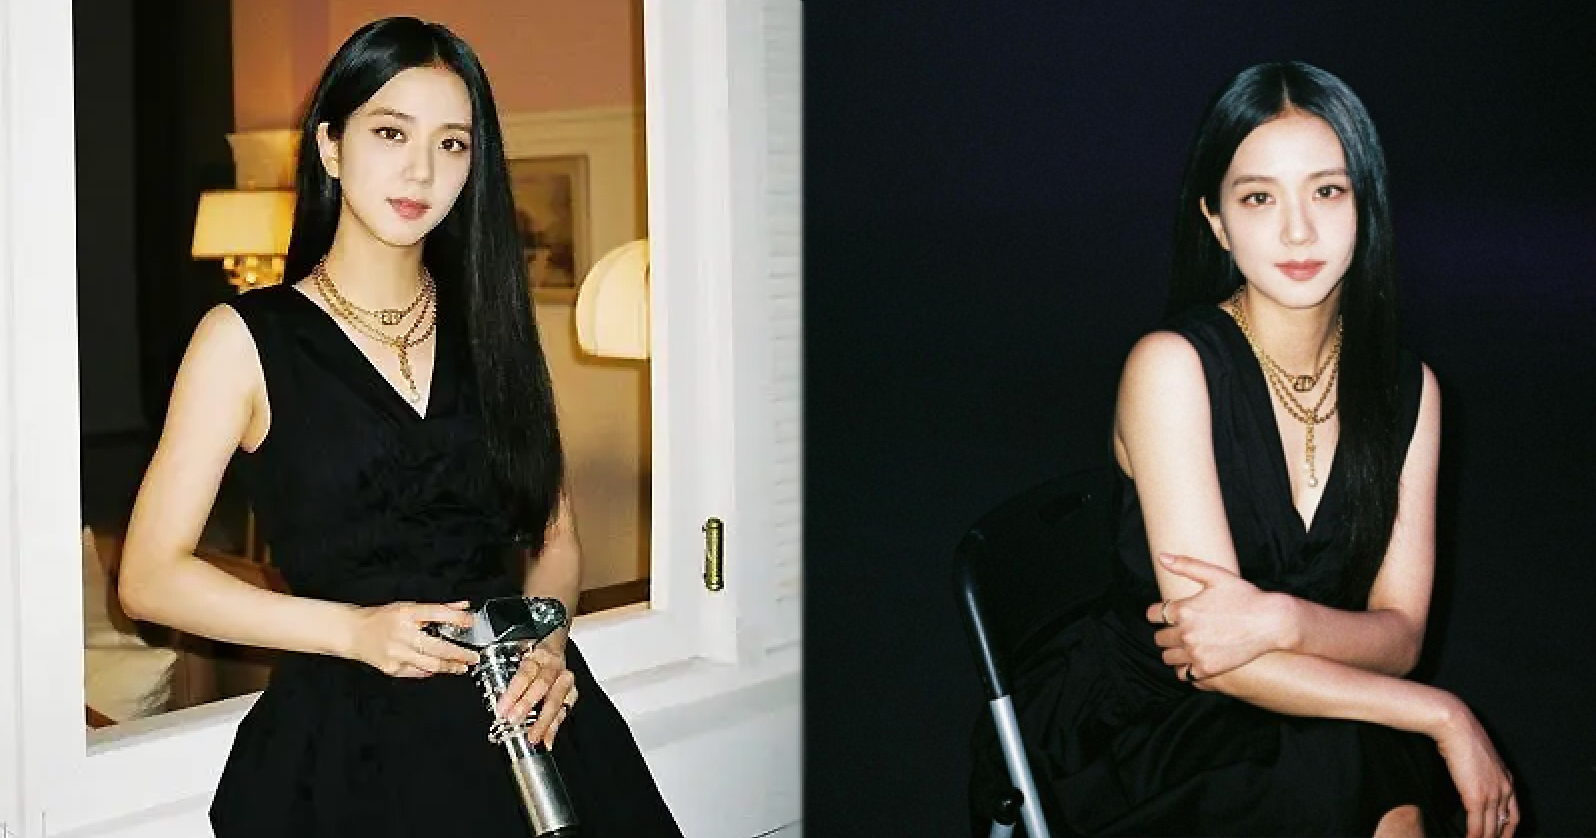 How Does It Cost For This Little Black Dress of BLACKPINK Jisoo?